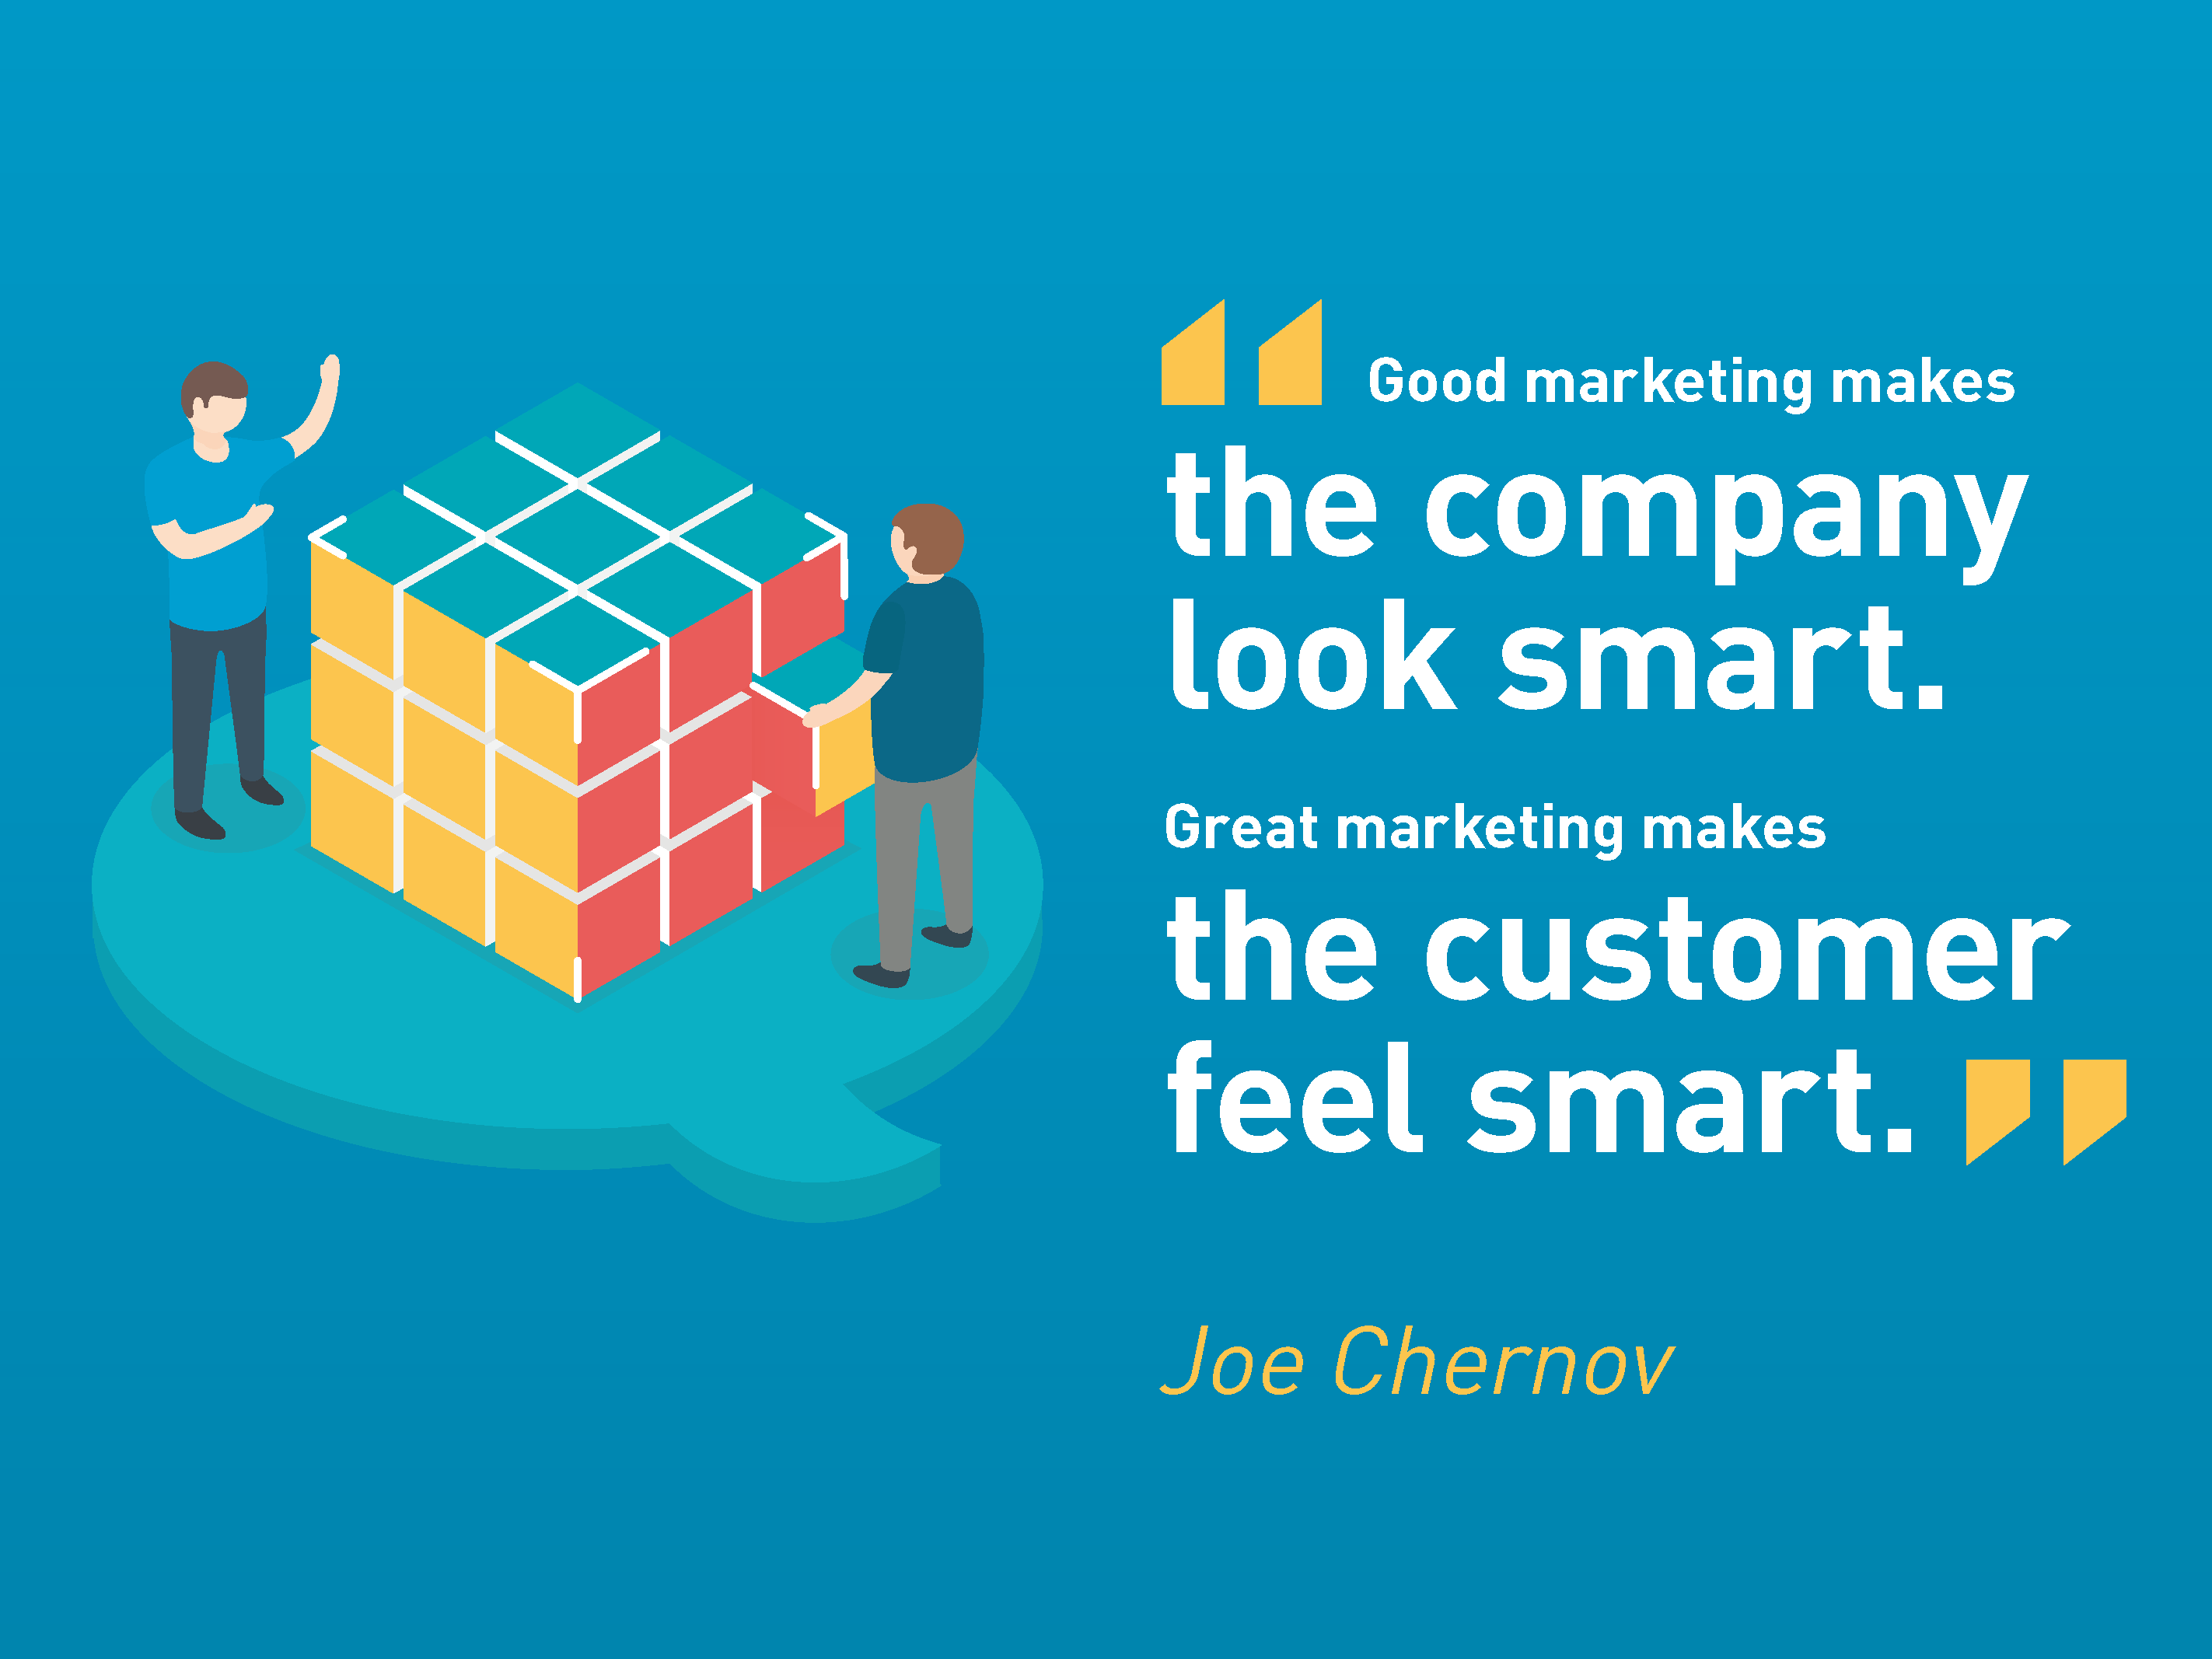 6 Sales and Marketing Quotes to Fire You Up Today